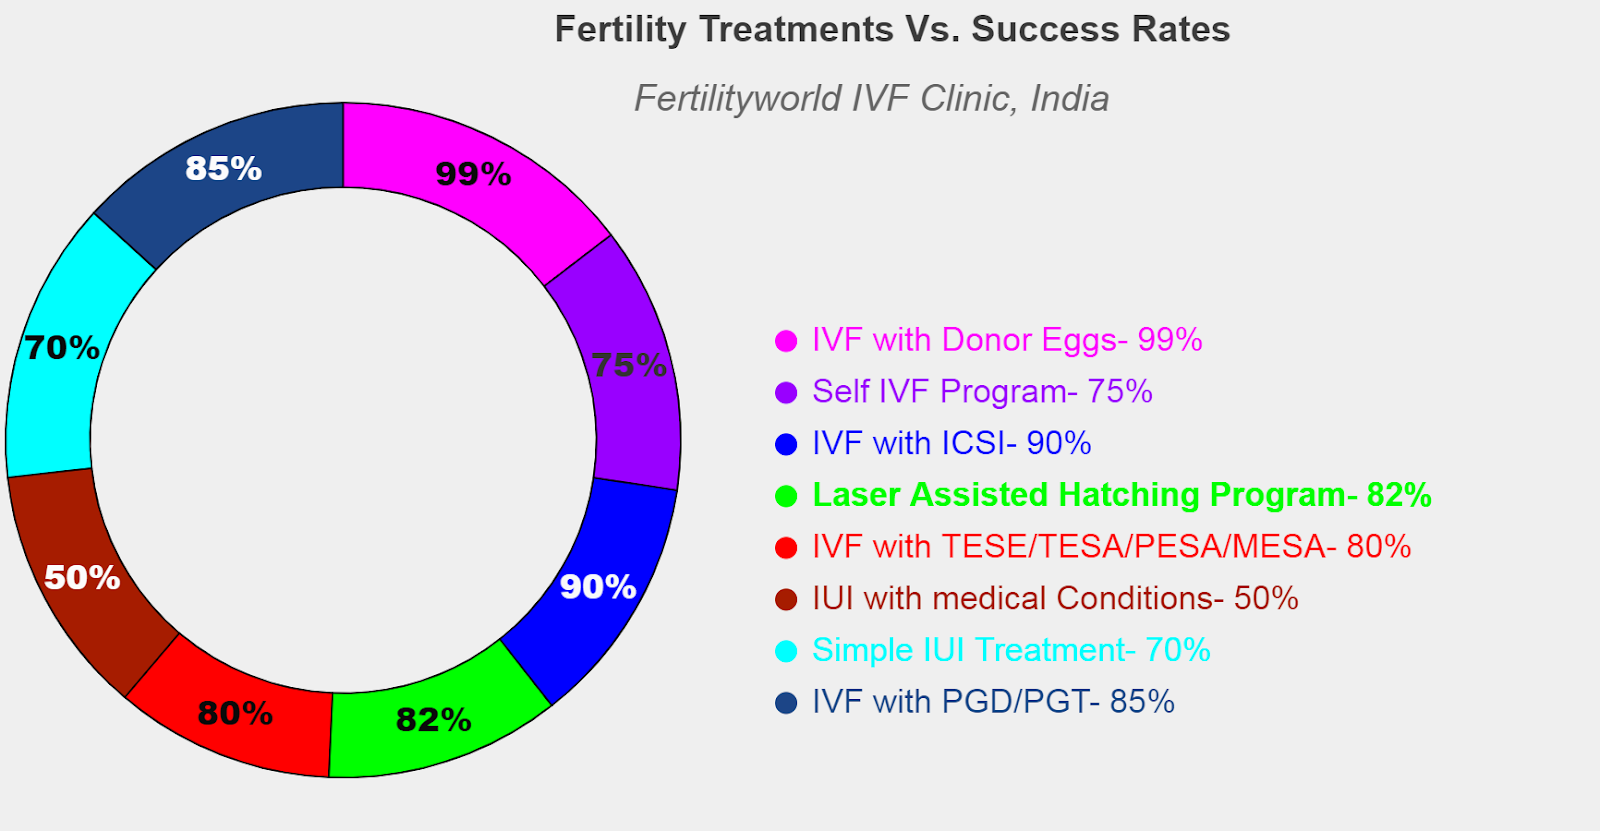 Which IVF clinic has the highest success rate in India